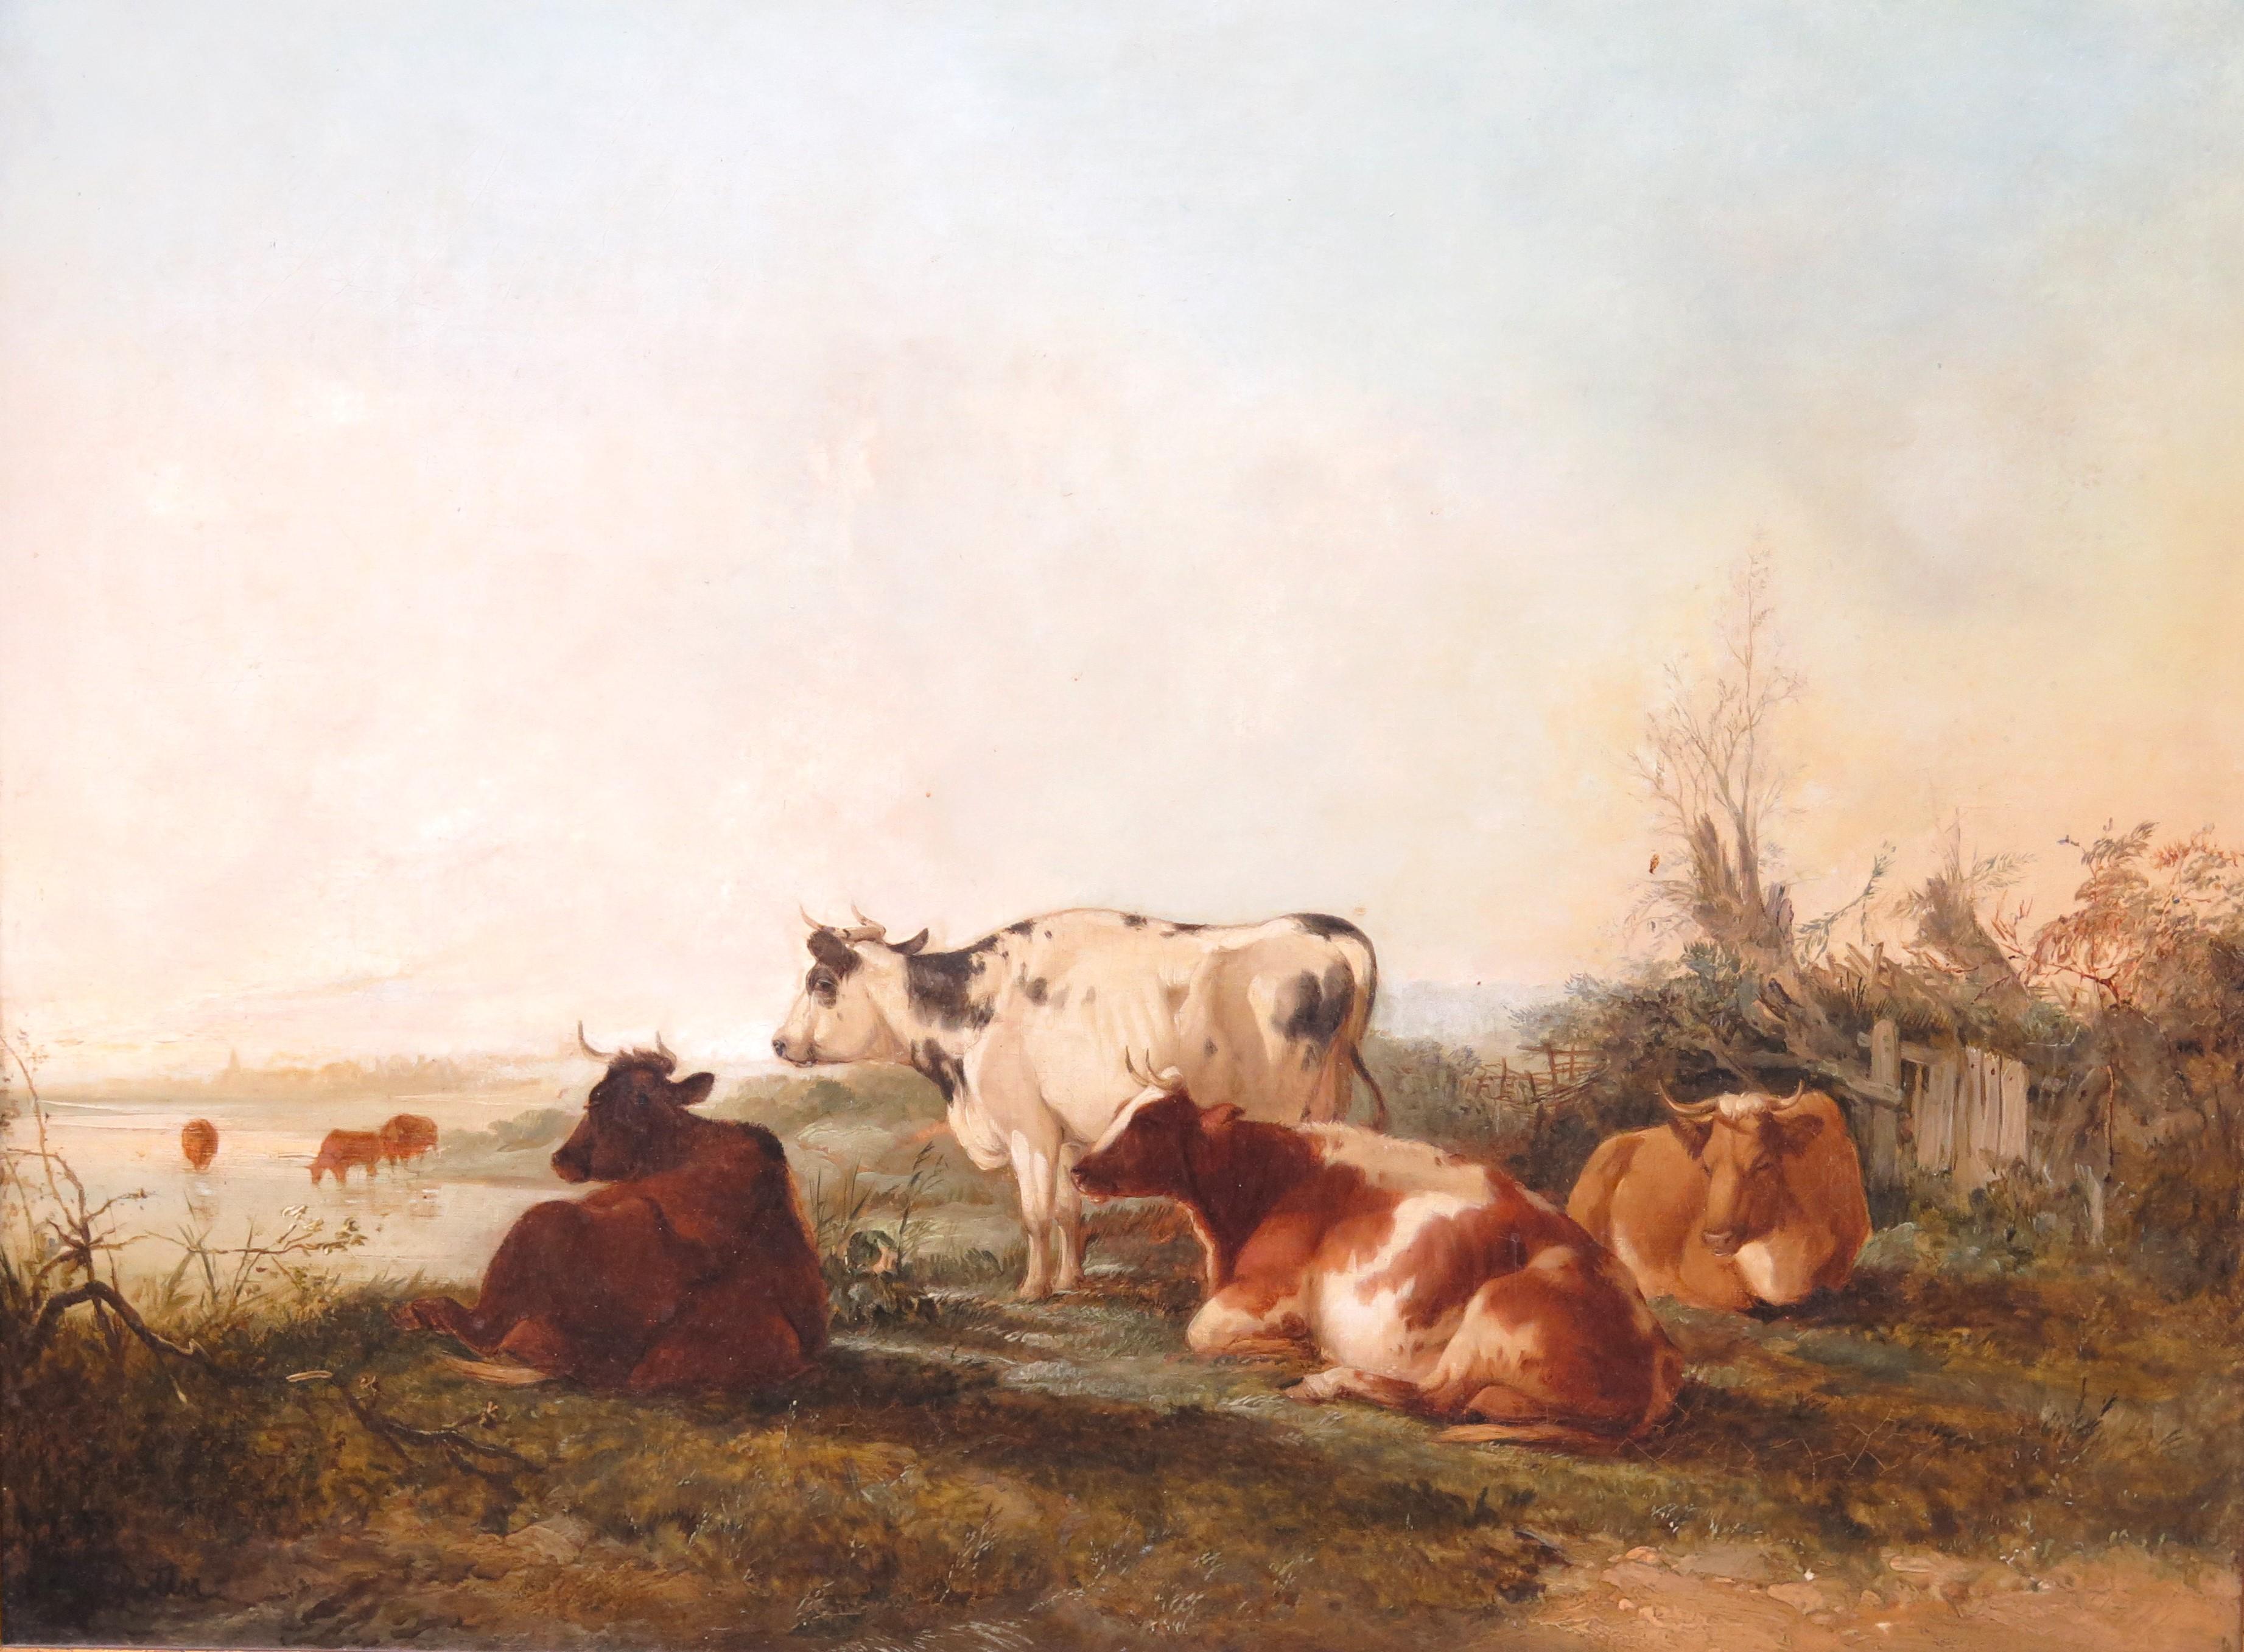 pastorial landscape picture with cattle in the Manner of Paulus Potter, (Dutch, 1625-1654), oil on canvas, picture has been relined, some overpainting, signed front lower left POTTER, Holland, 17th century

25